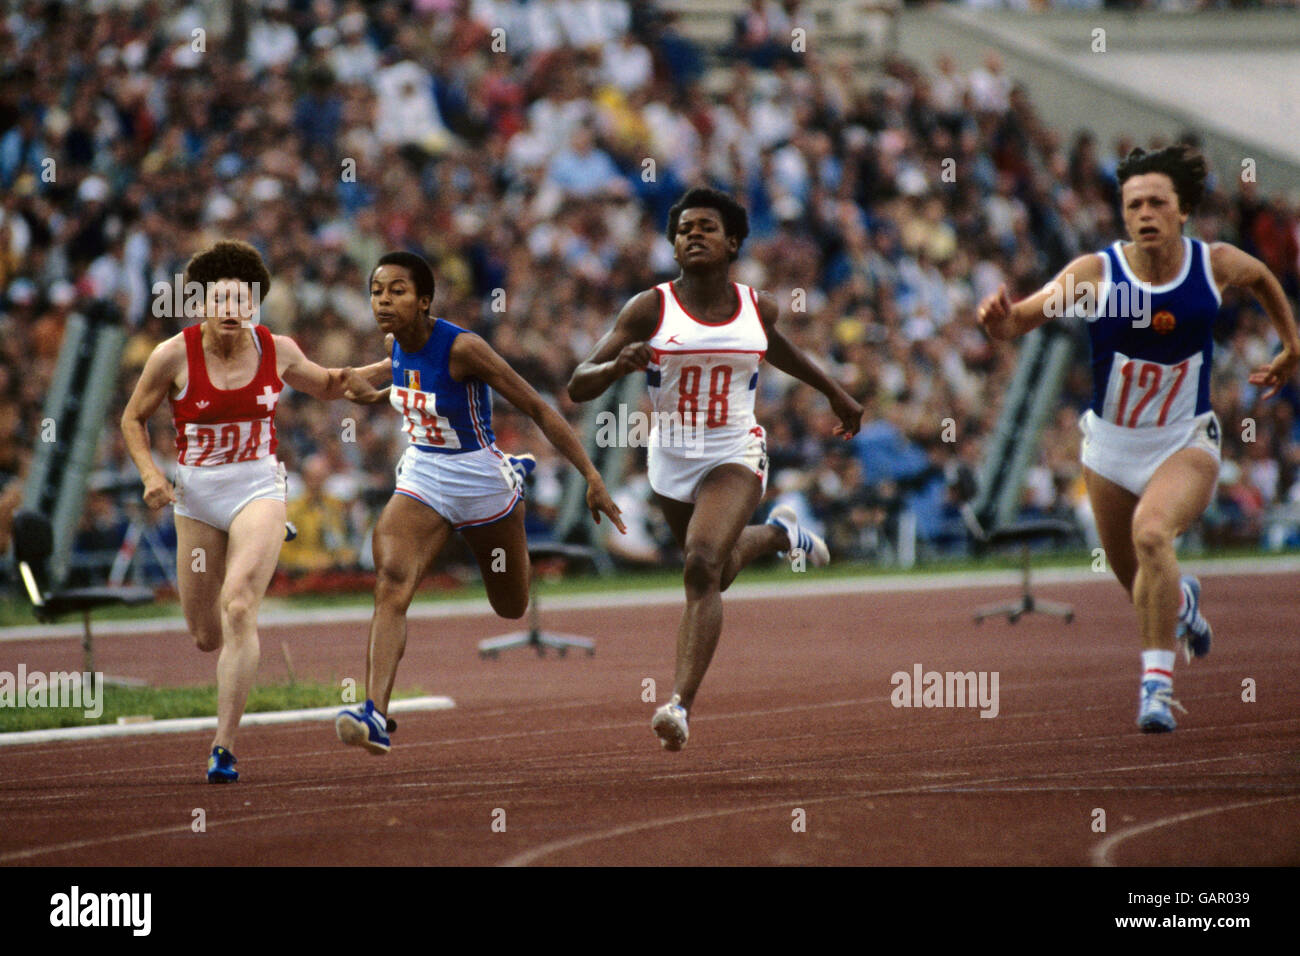 Heather Hunte of Great Britain, no. 88, in the Women's 100m heat in the Lenin Stadium, Moscow. She won the bronze medal along with Beverly Goddard, Sonia Lannaman and Kathy Smallwood in the 4x100m relay. Stock Photo